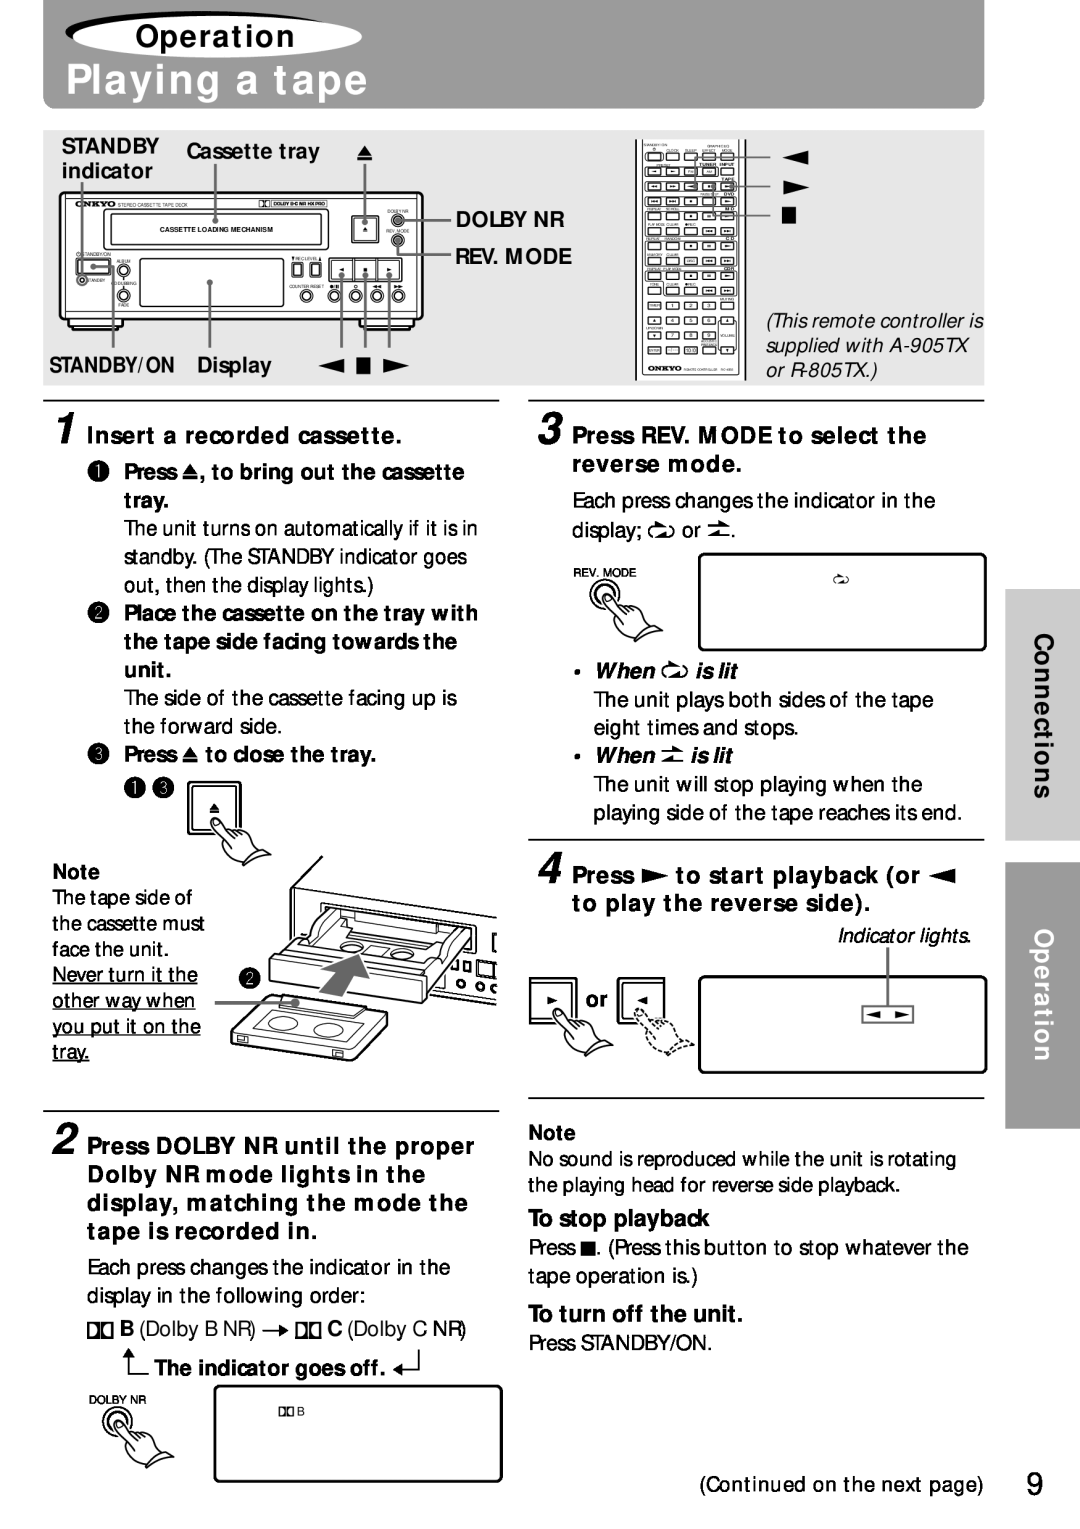 Onkyo K-505TX instruction manual Playing a tape, Operation, Connections, When is lit, Indicator lights 